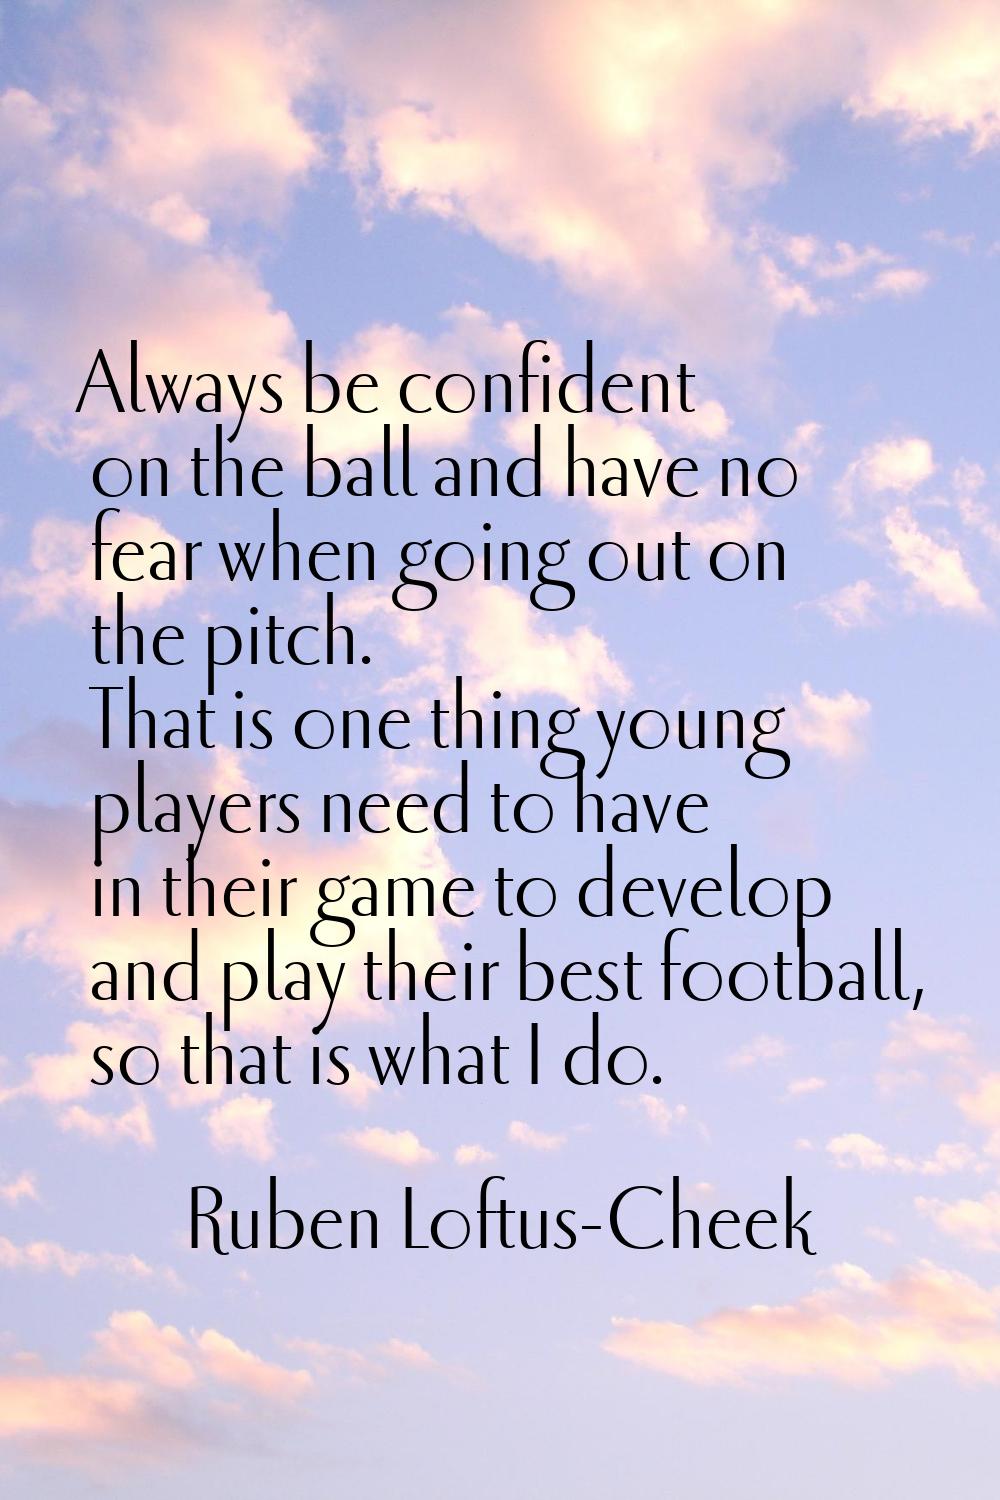 Always be confident on the ball and have no fear when going out on the pitch. That is one thing you